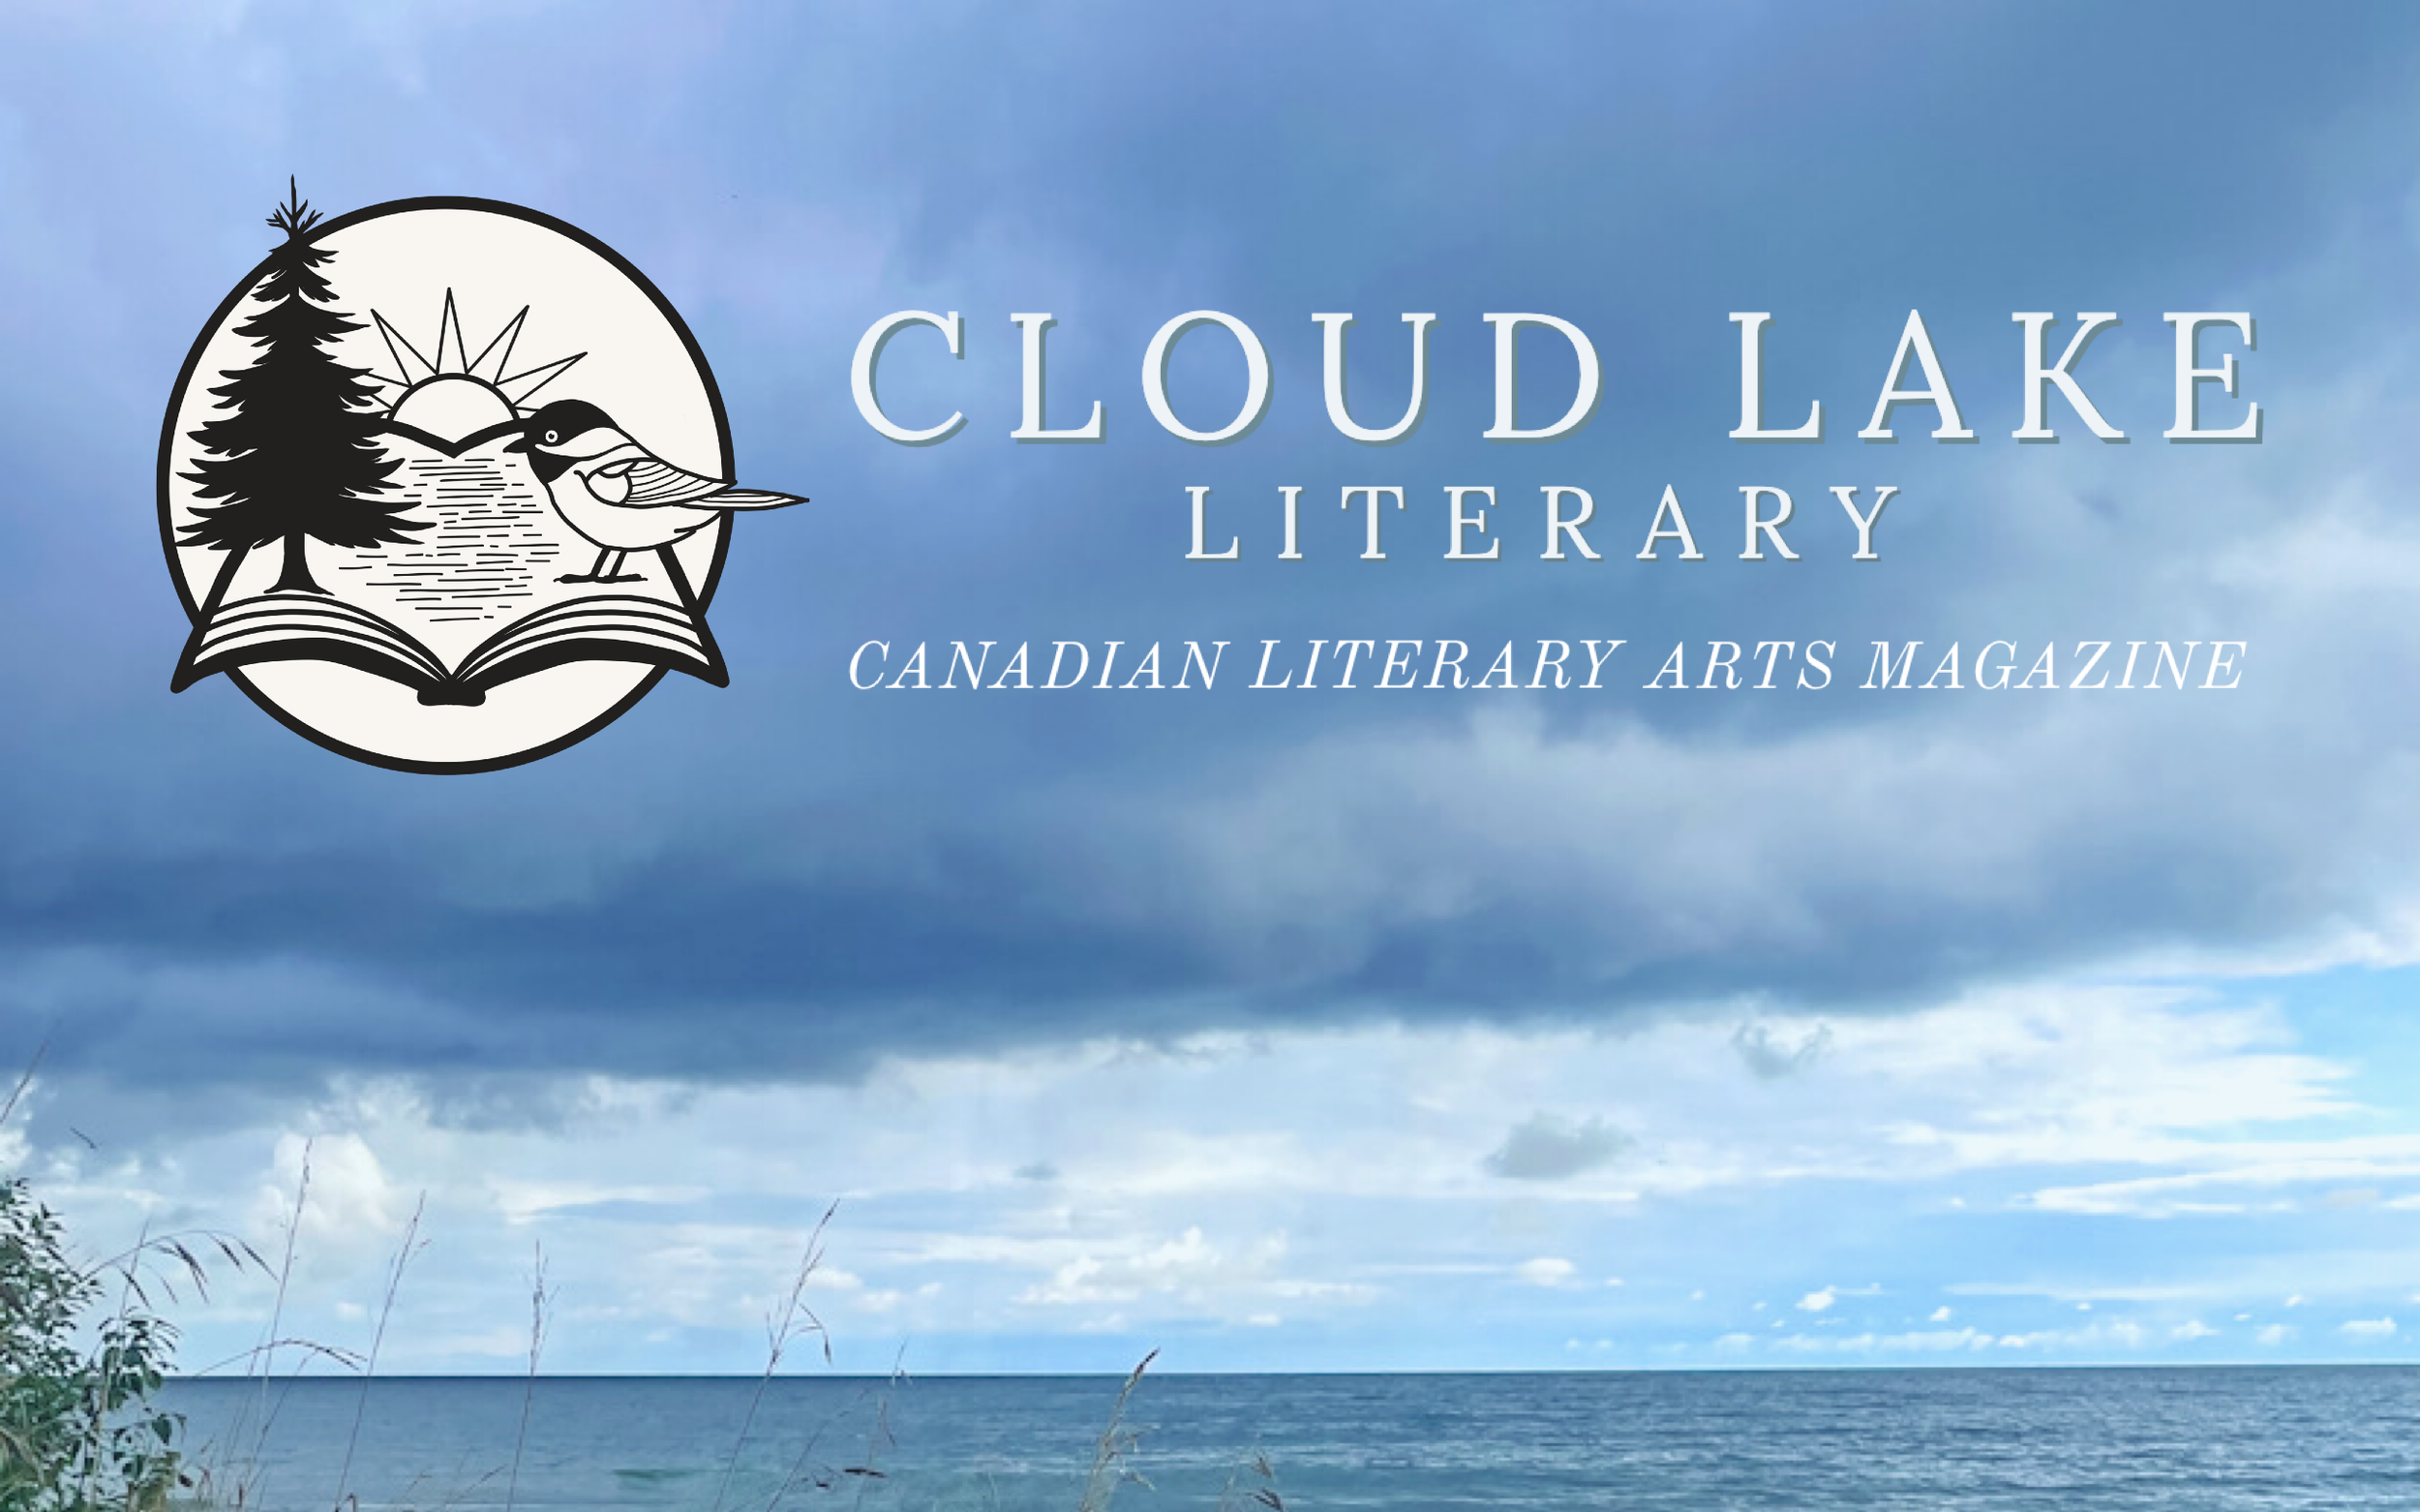 Front cover of Cloud Lake Literary's latest magazine issue, visually representing the richness of Canadian literature. The cover, funded through a $5,200 grant from the Ontario Arts Council, highlights the magazine's commitment to showcasing Canadian literary talent, including both written and oral narratives.